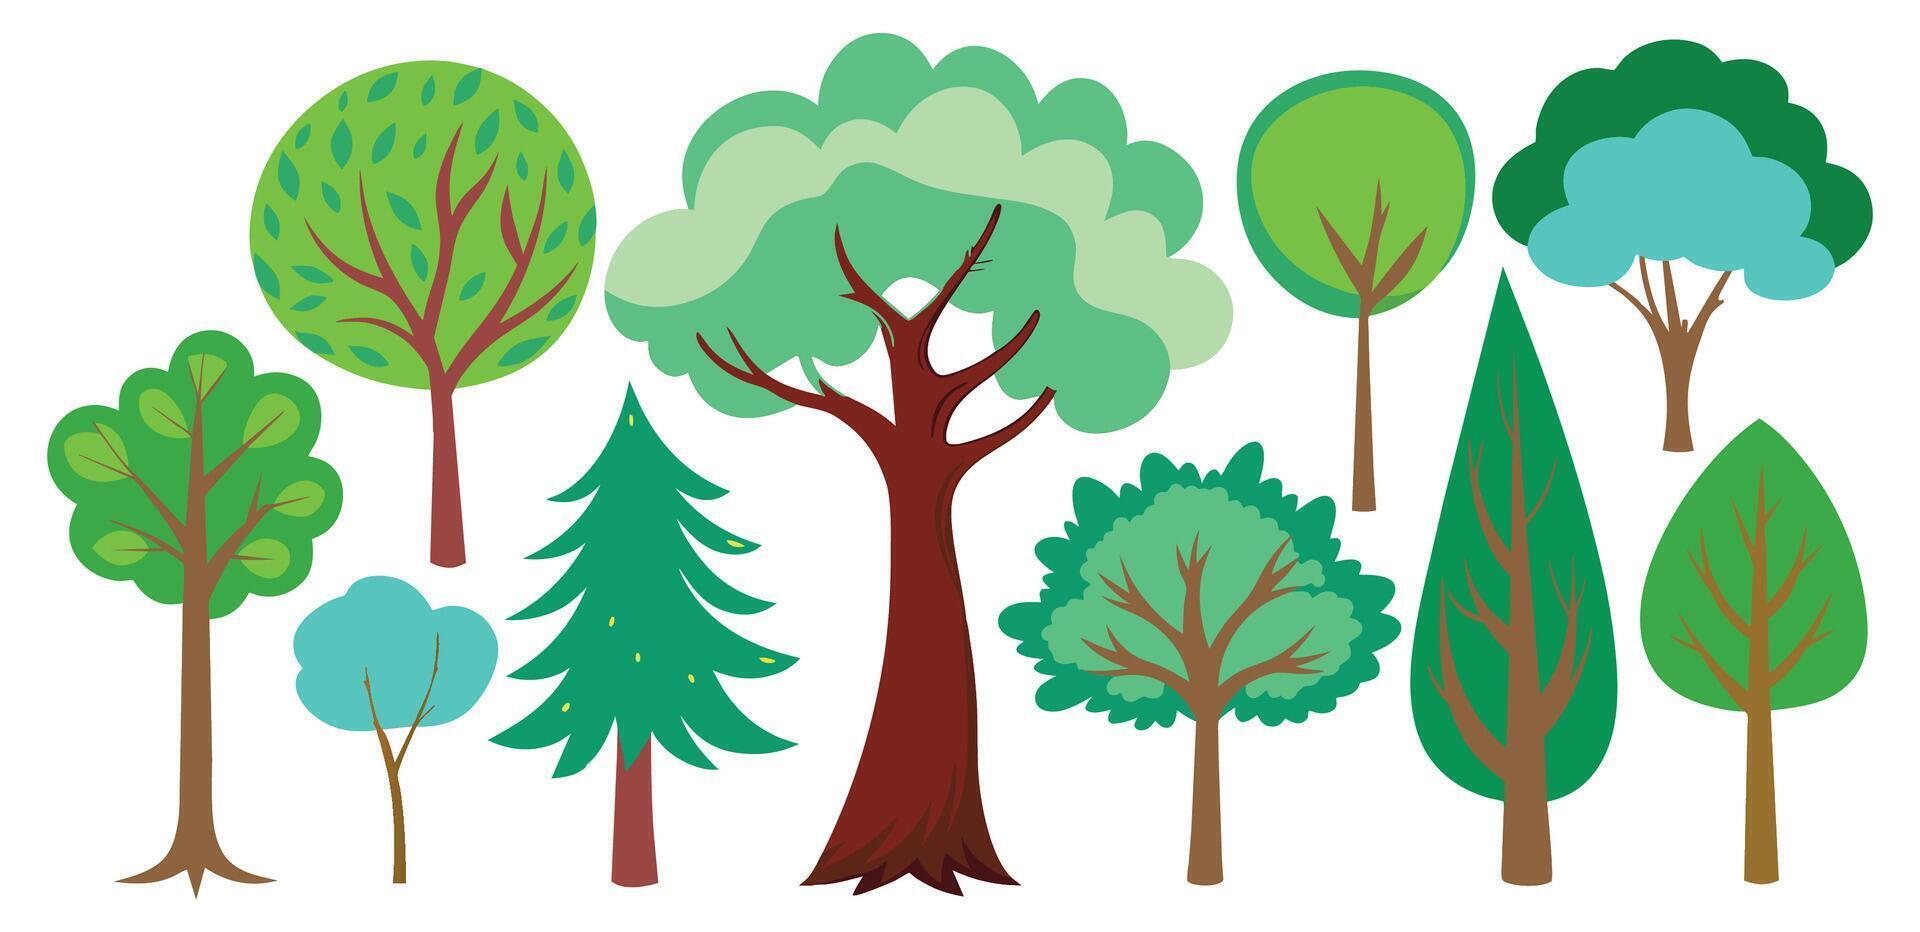 hand drawn trees collection set, illustration vector for infographic or other uses